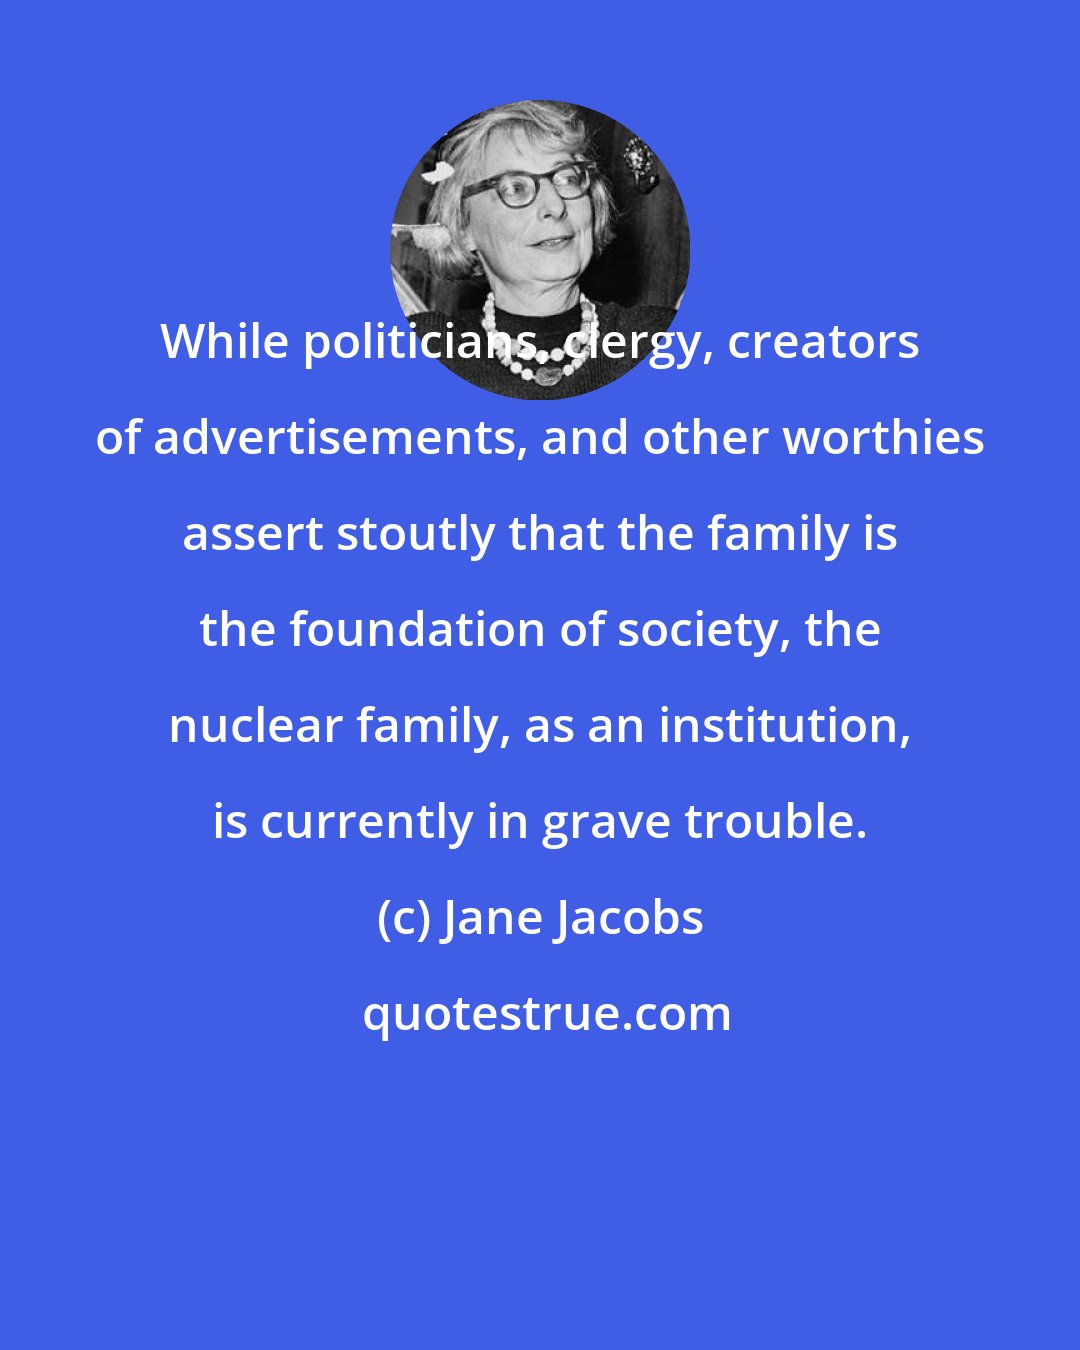 Jane Jacobs: While politicians, clergy, creators of advertisements, and other worthies assert stoutly that the family is the foundation of society, the nuclear family, as an institution, is currently in grave trouble.